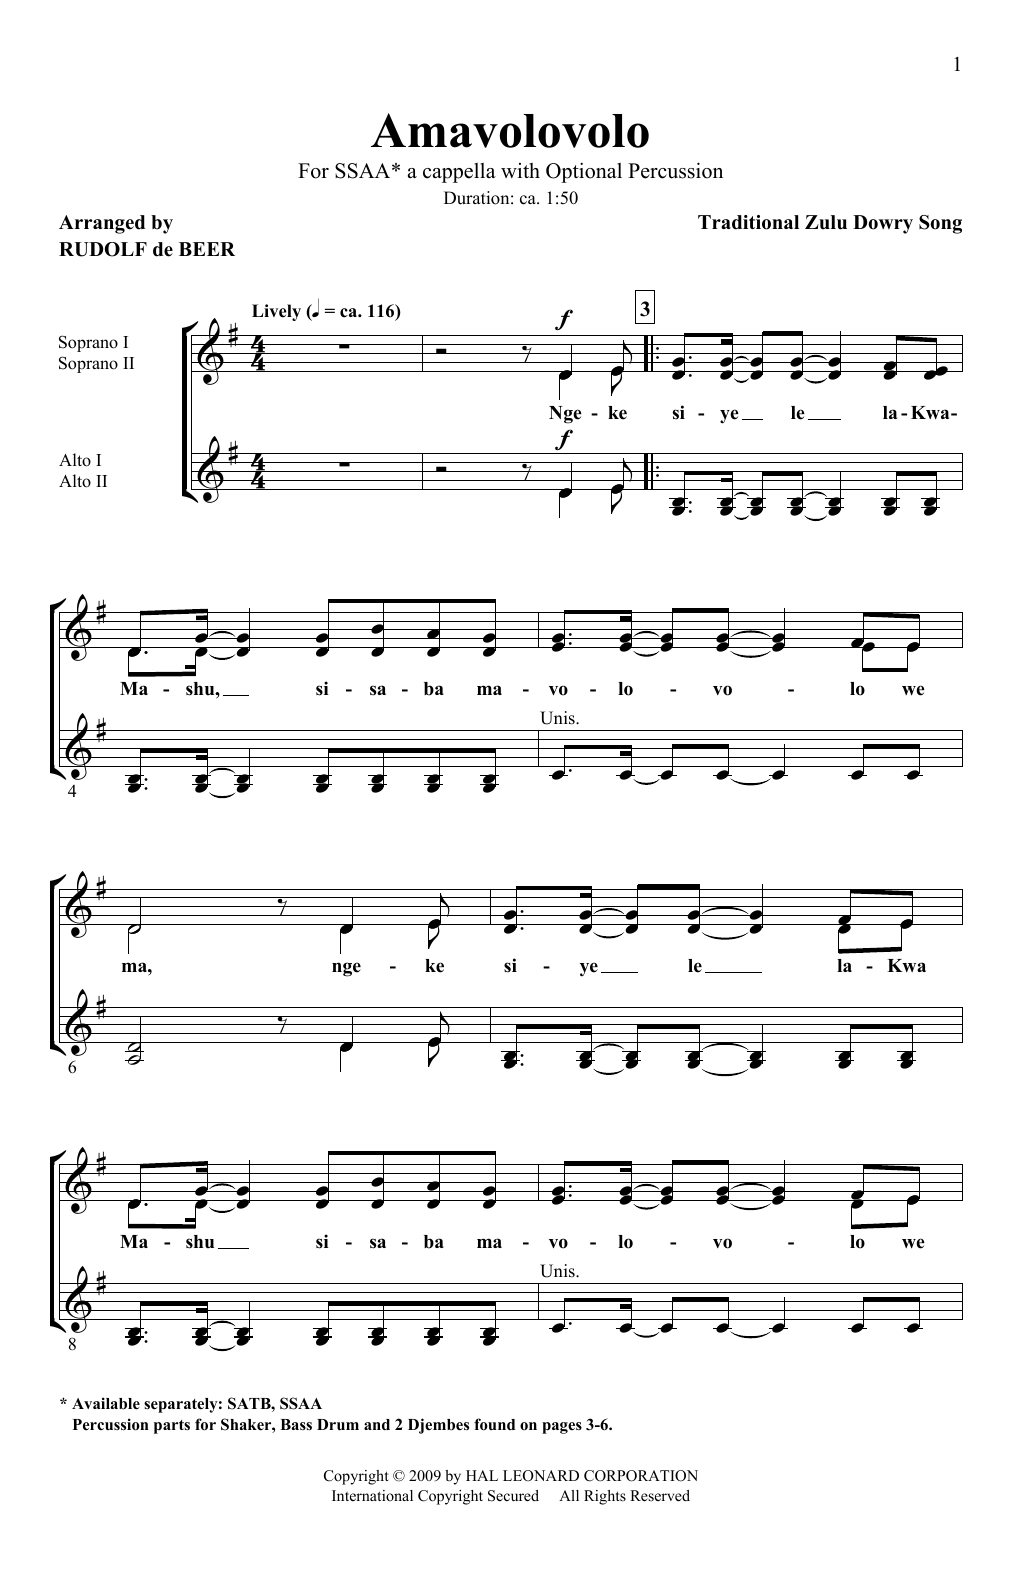 Traditional Zulu Dowry Song Amavolovolo (arr. Rudolf de Beer) sheet music notes and chords arranged for SSAA Choir